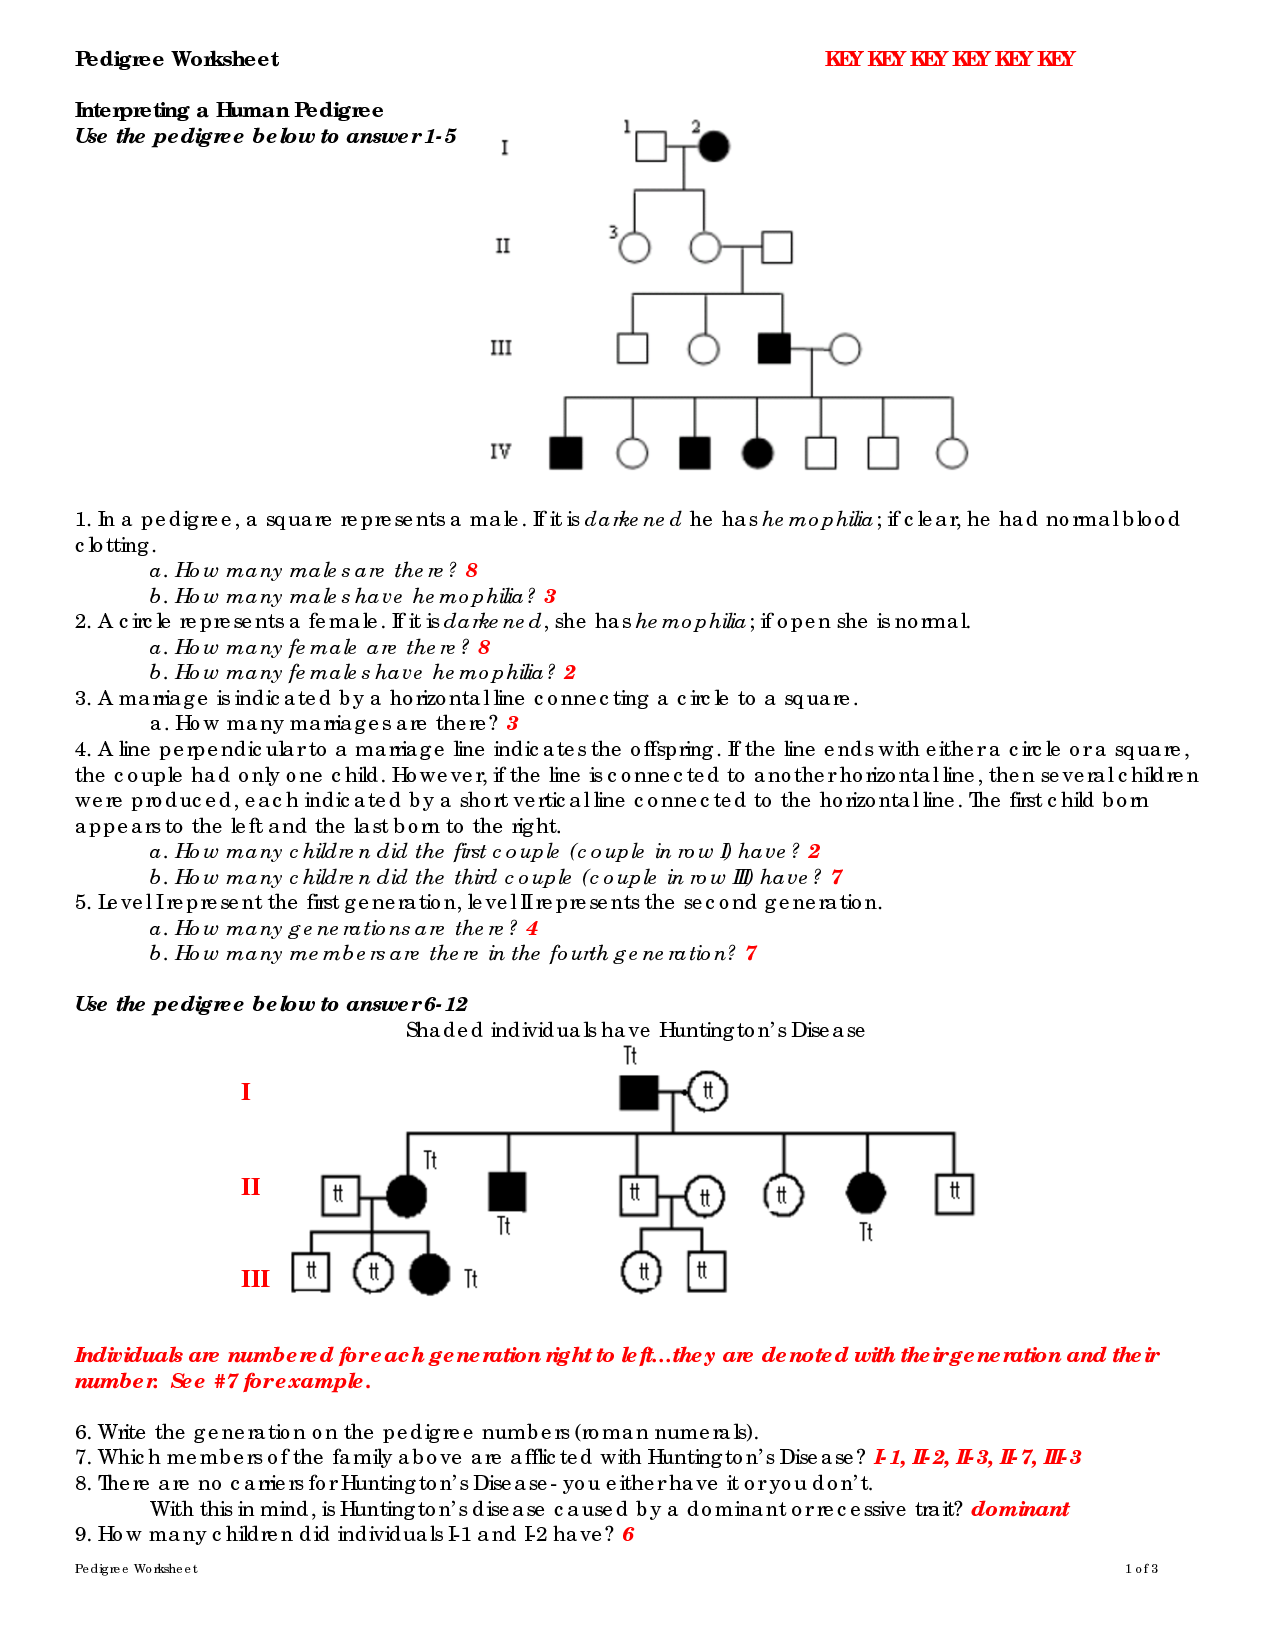 lecture assignment 2 genetics problems